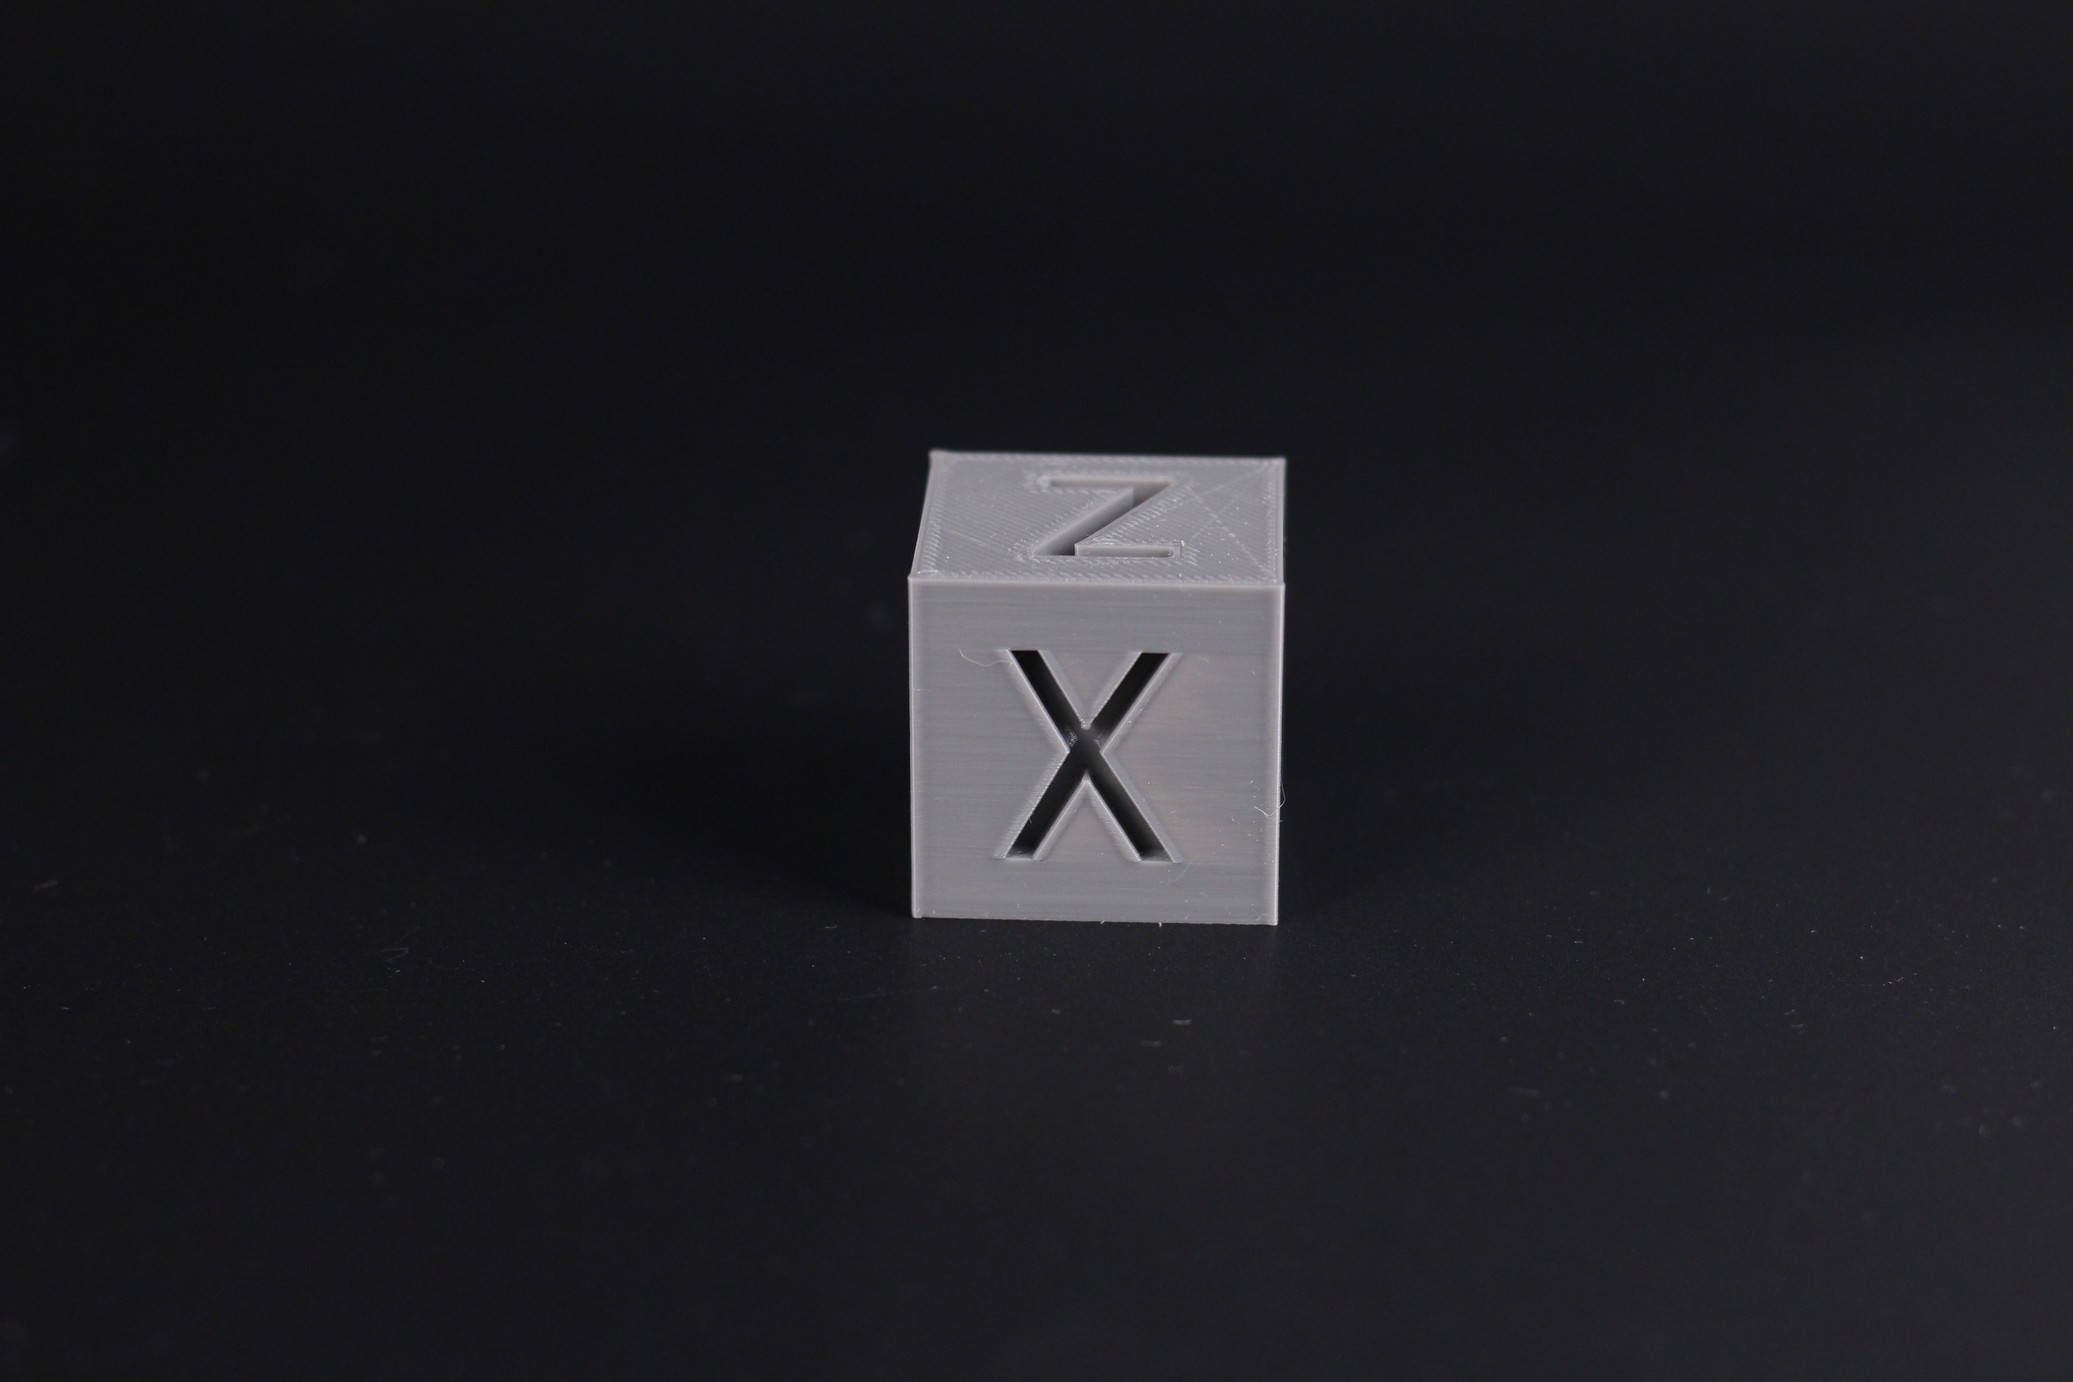 Anycubic Kobra 200 calibration cube 5 | Anycubic Kobra Review: The New Budget Standard